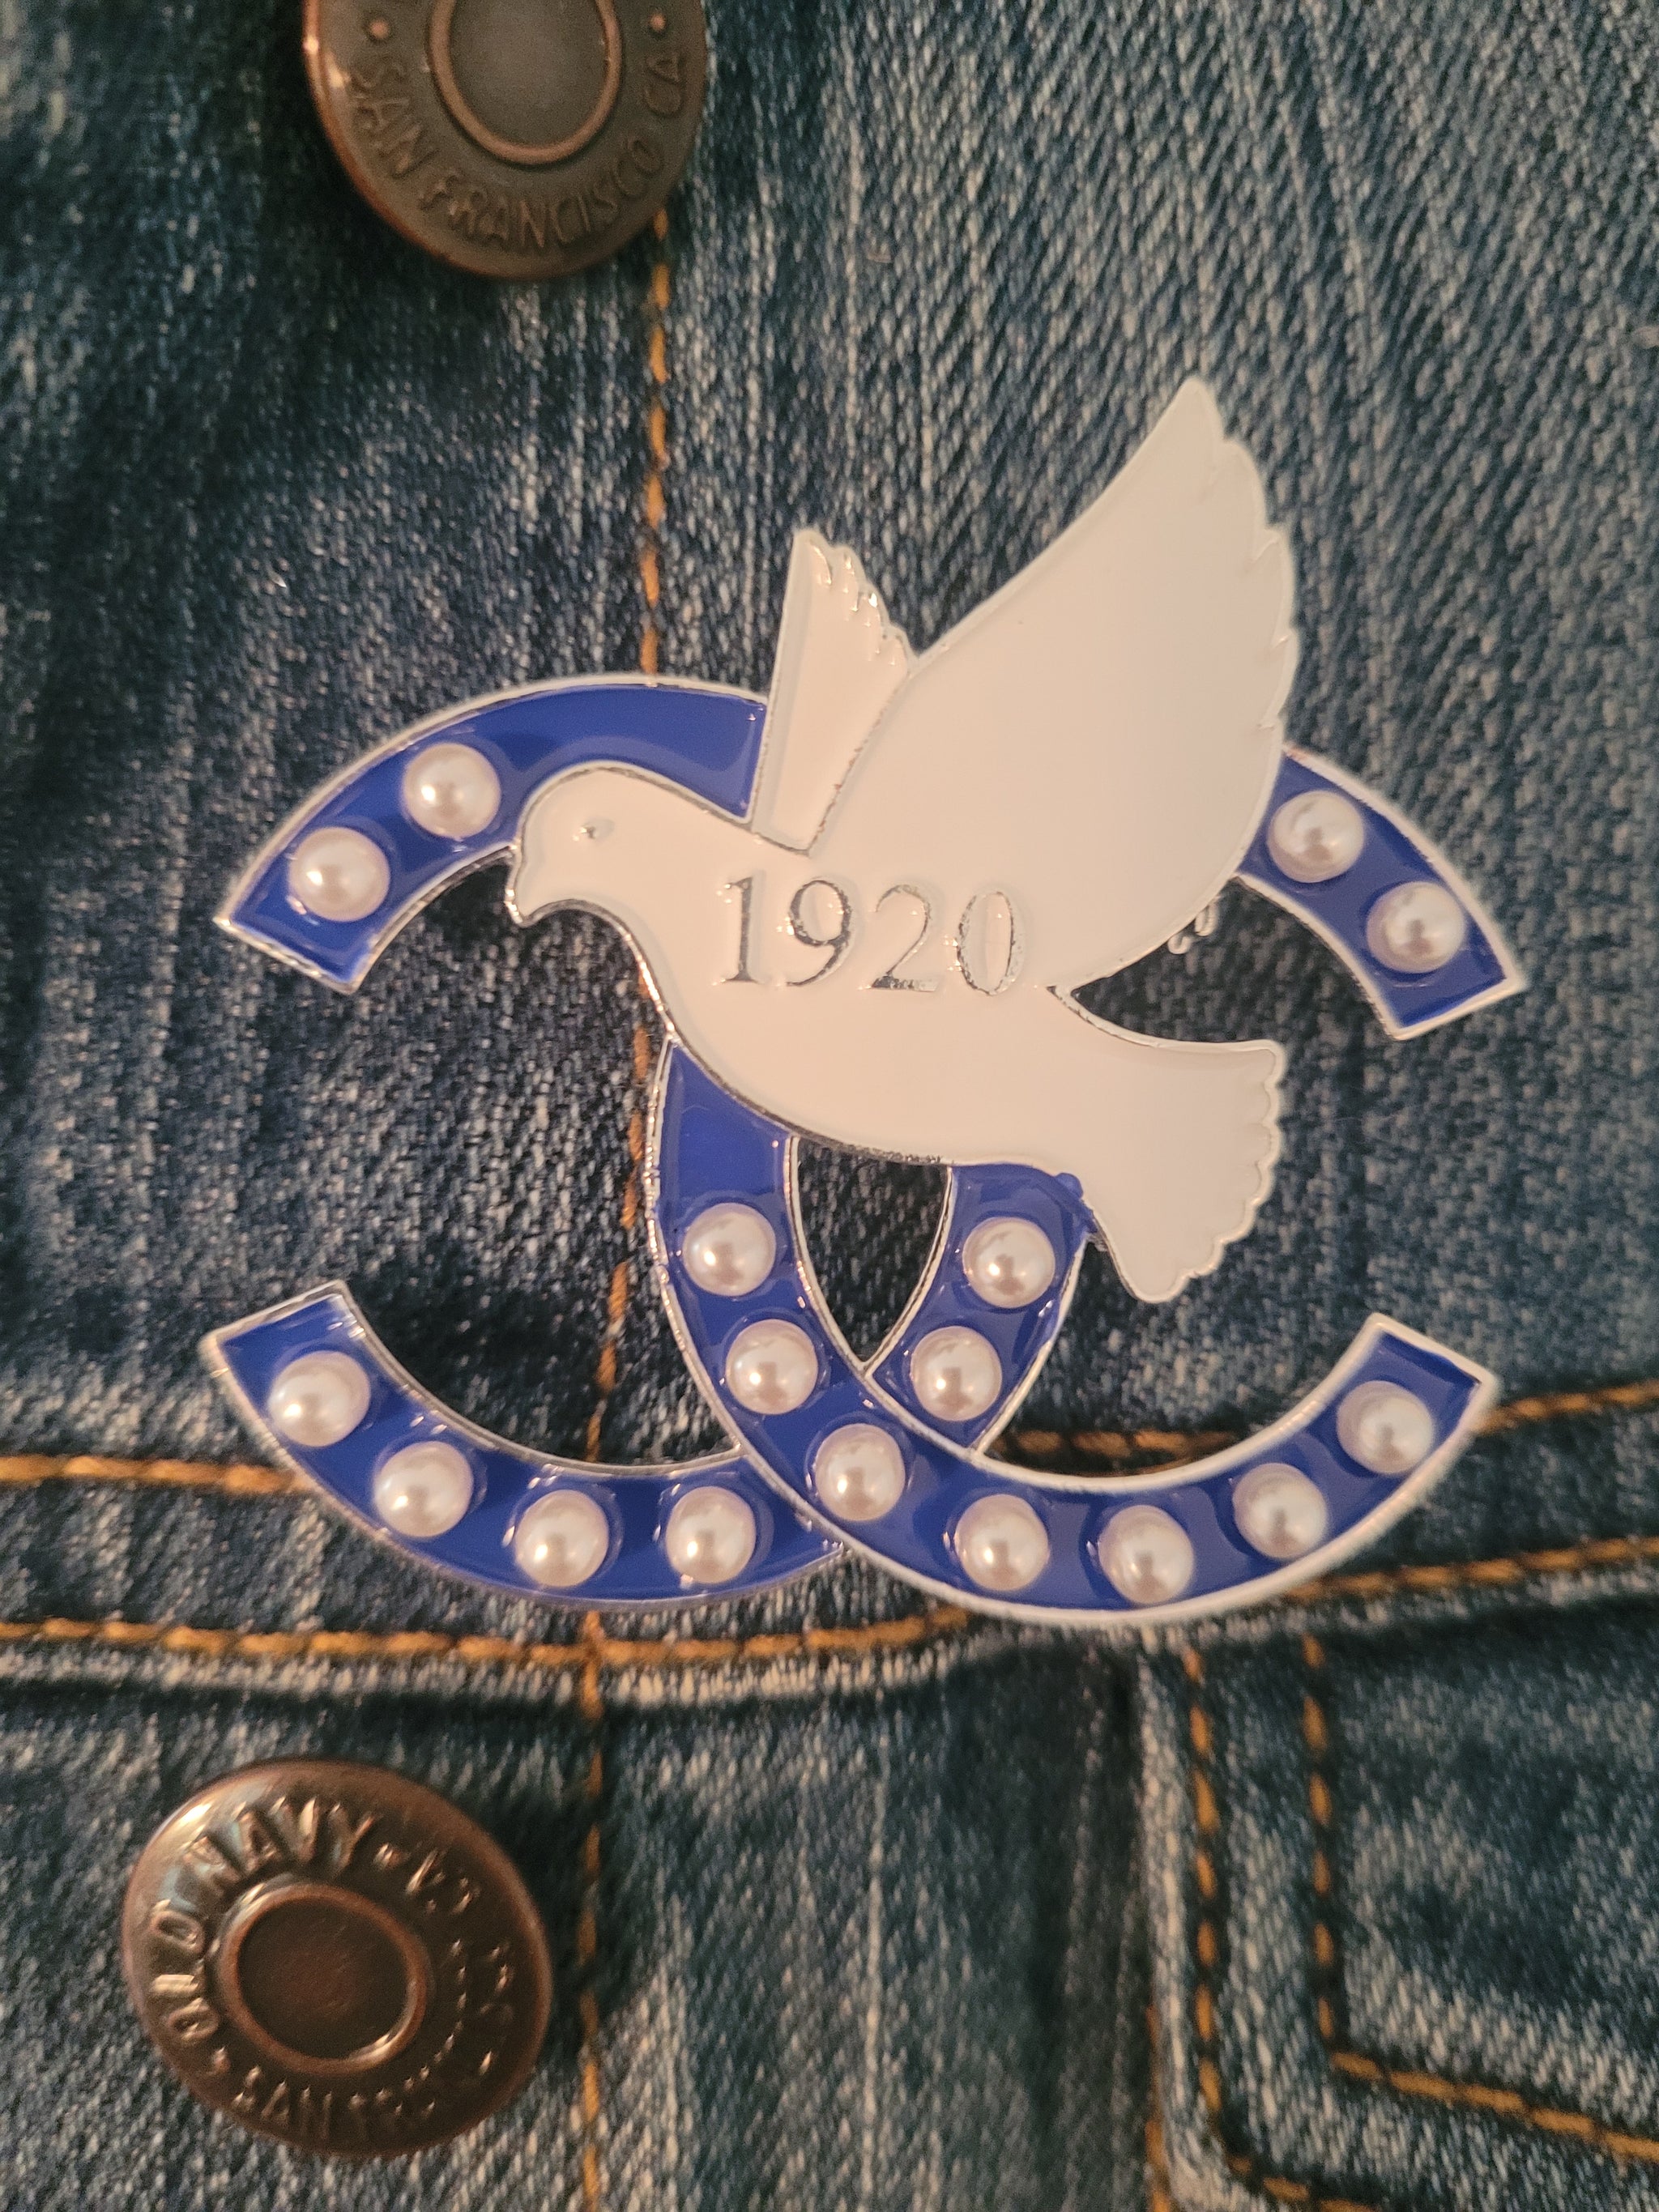 Chanel/Dove Pin - Greek CertiPHIed Apparel